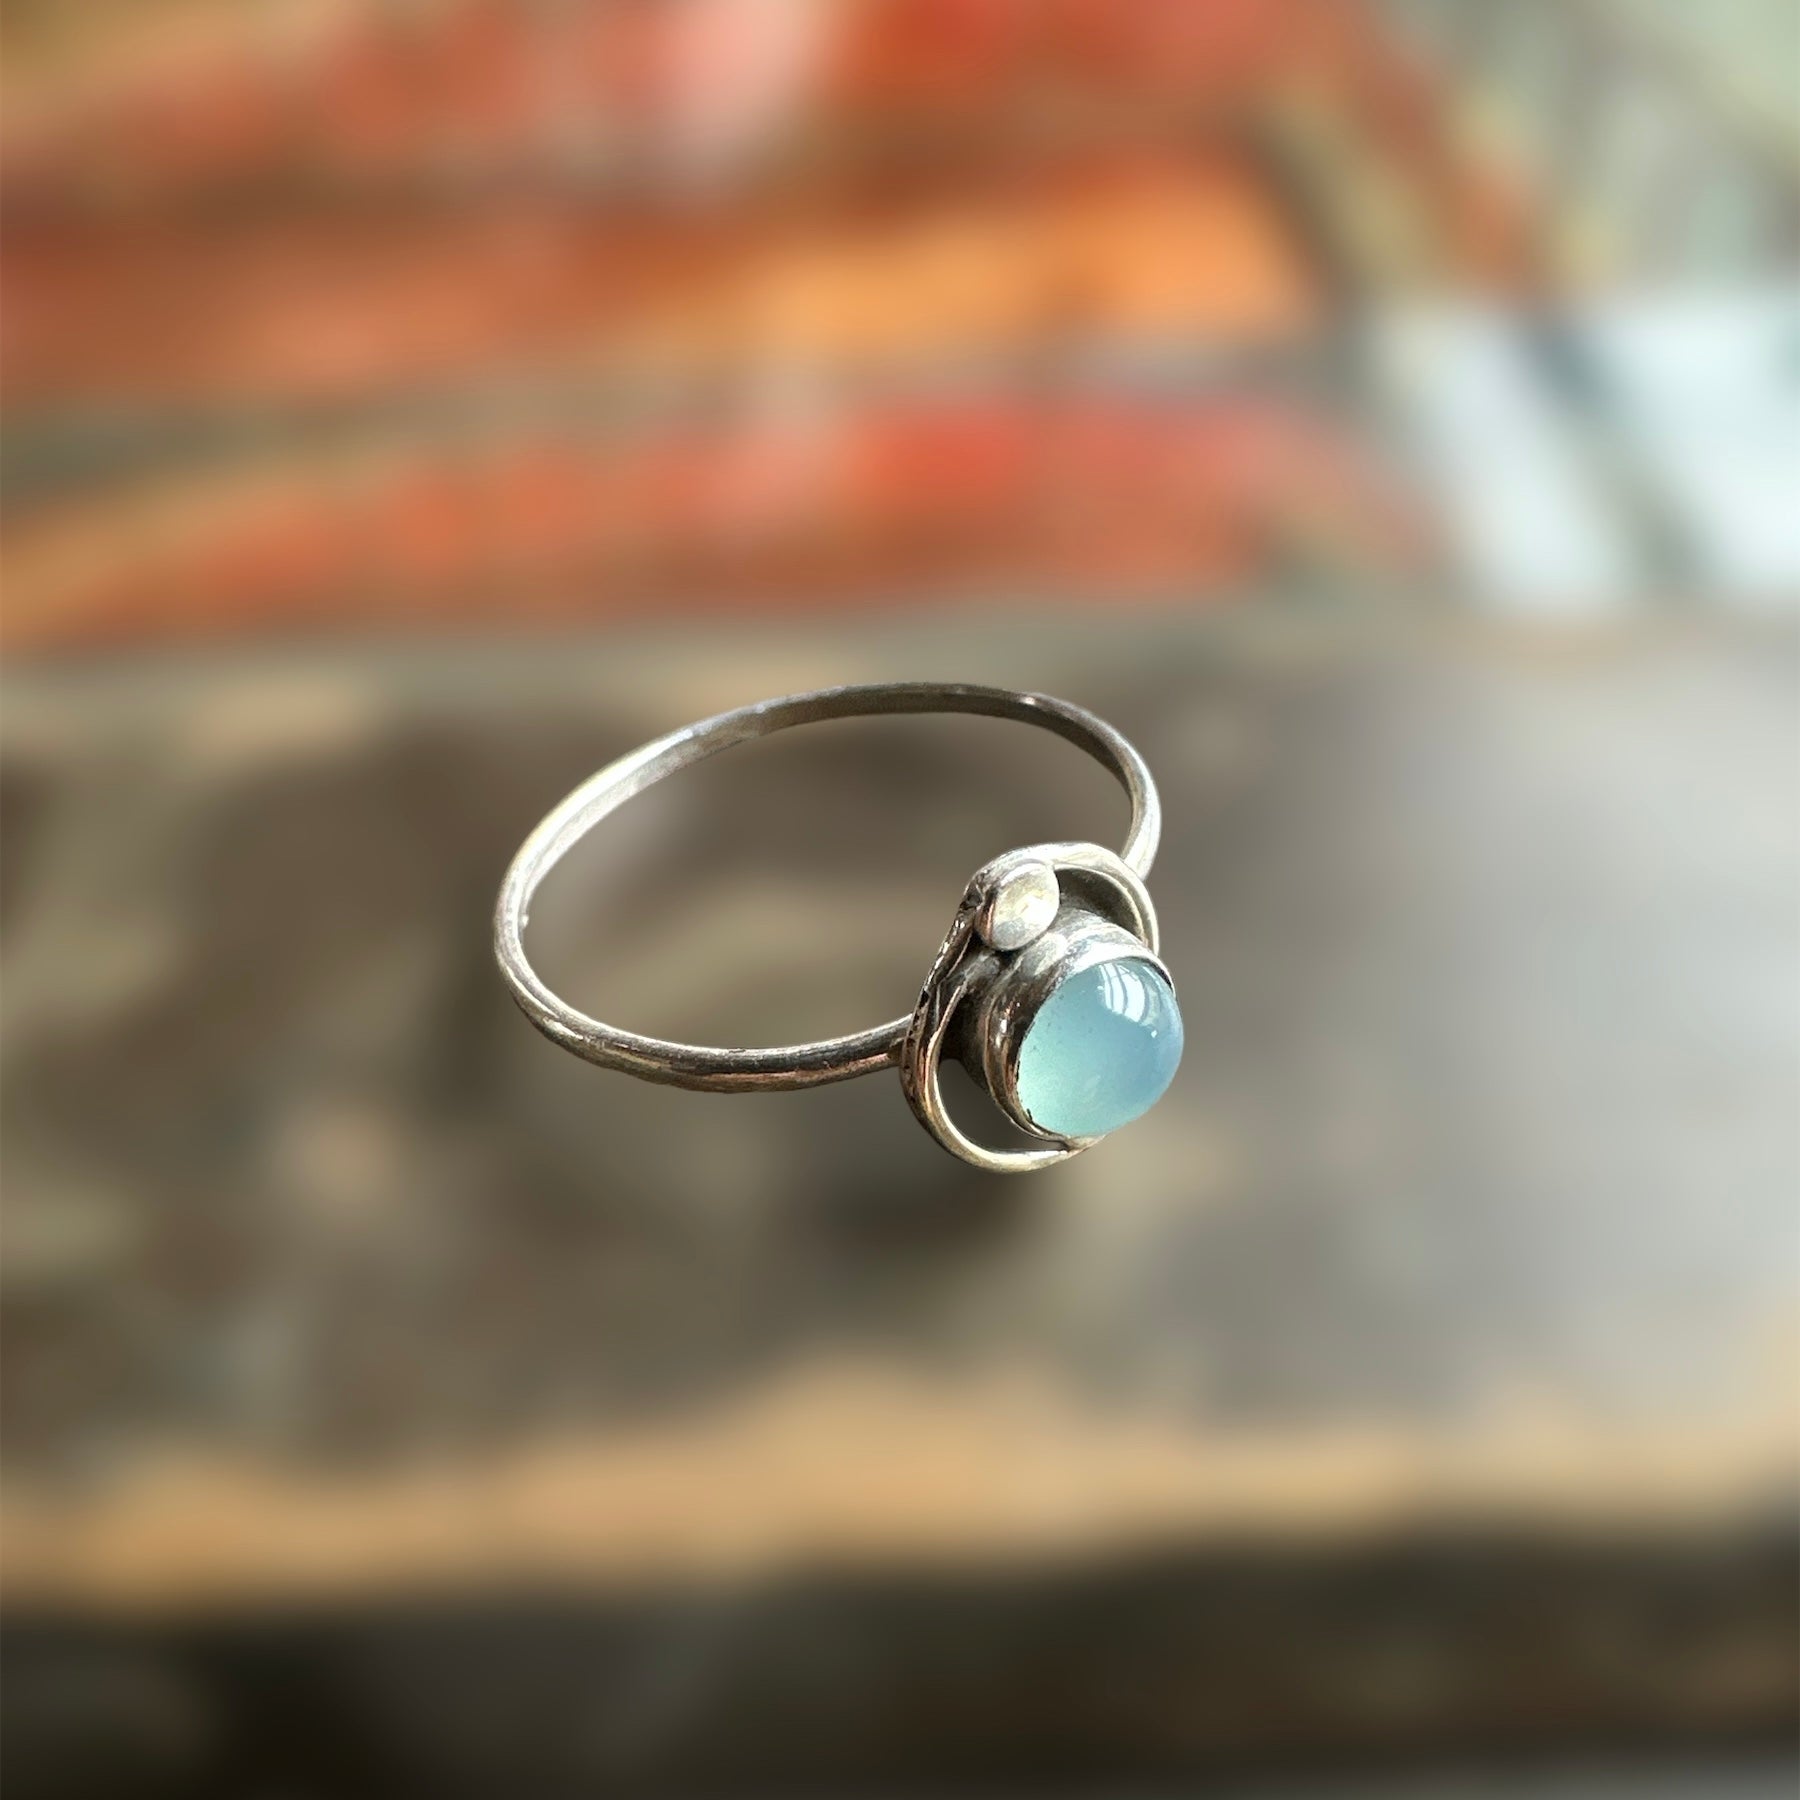 Sterling silver 925 Opalite ring with swirl detail